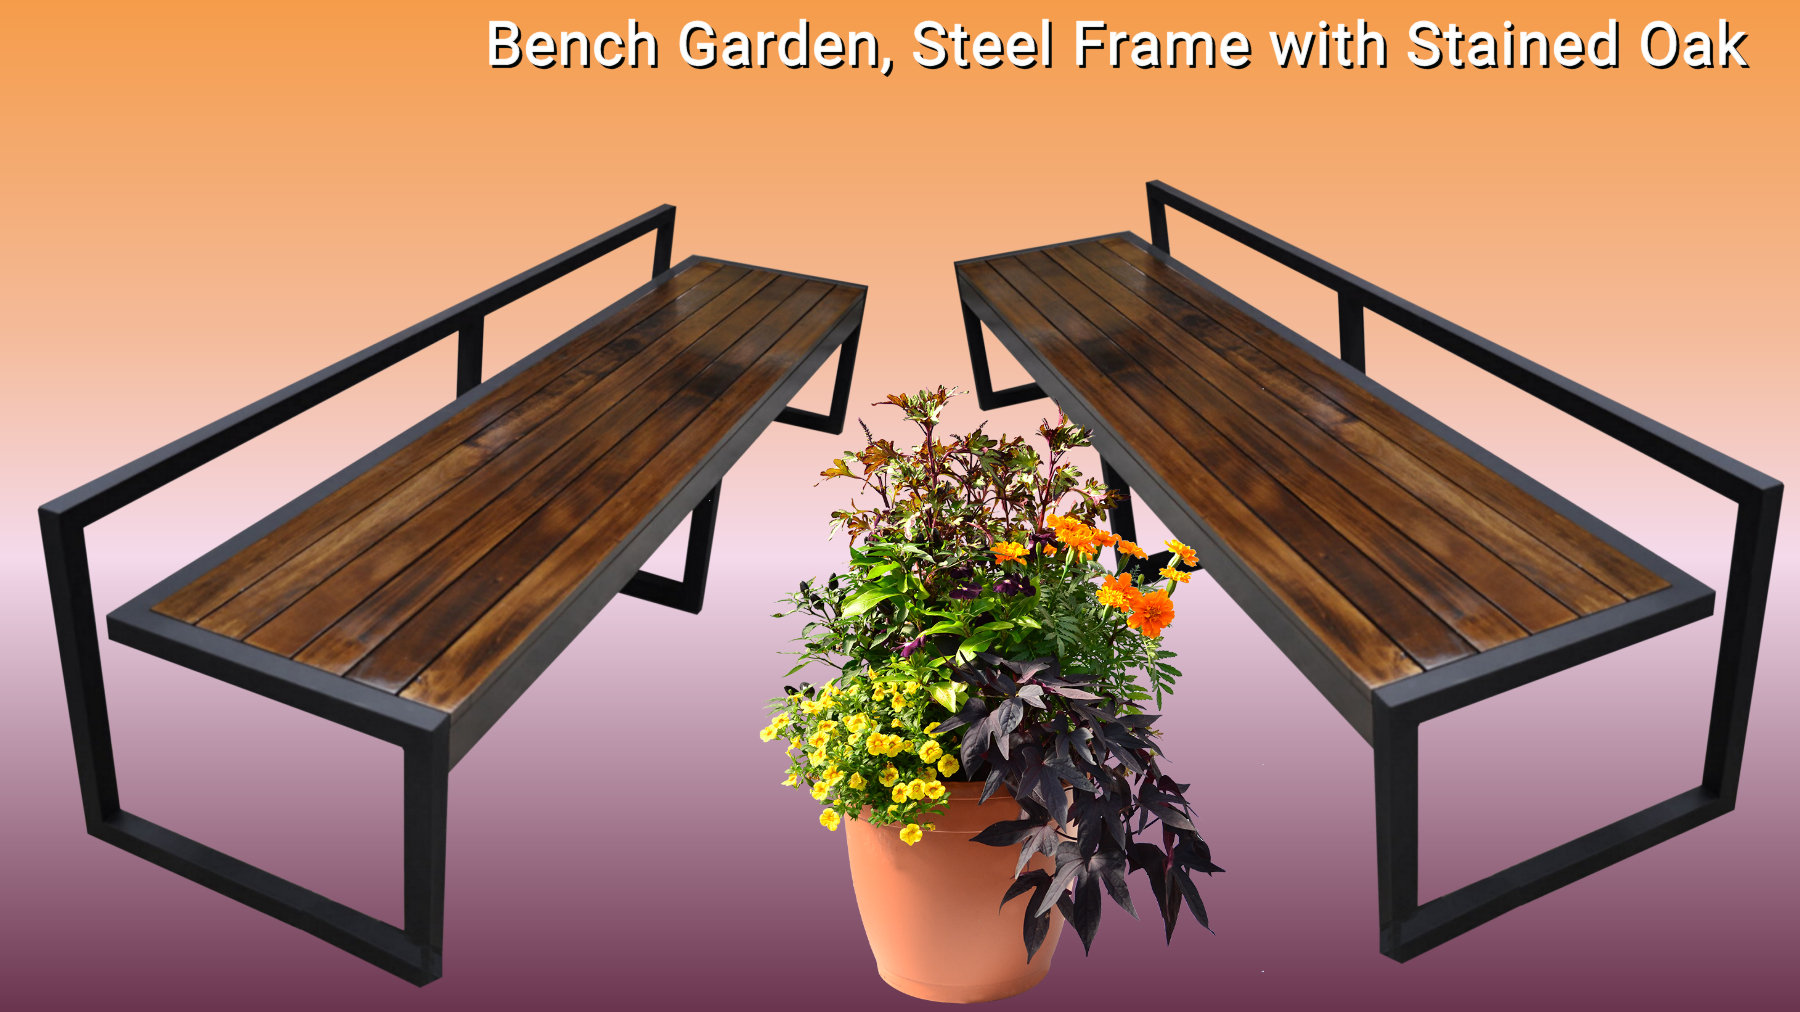 Bench Garden, Steel Frame with Stained Oak